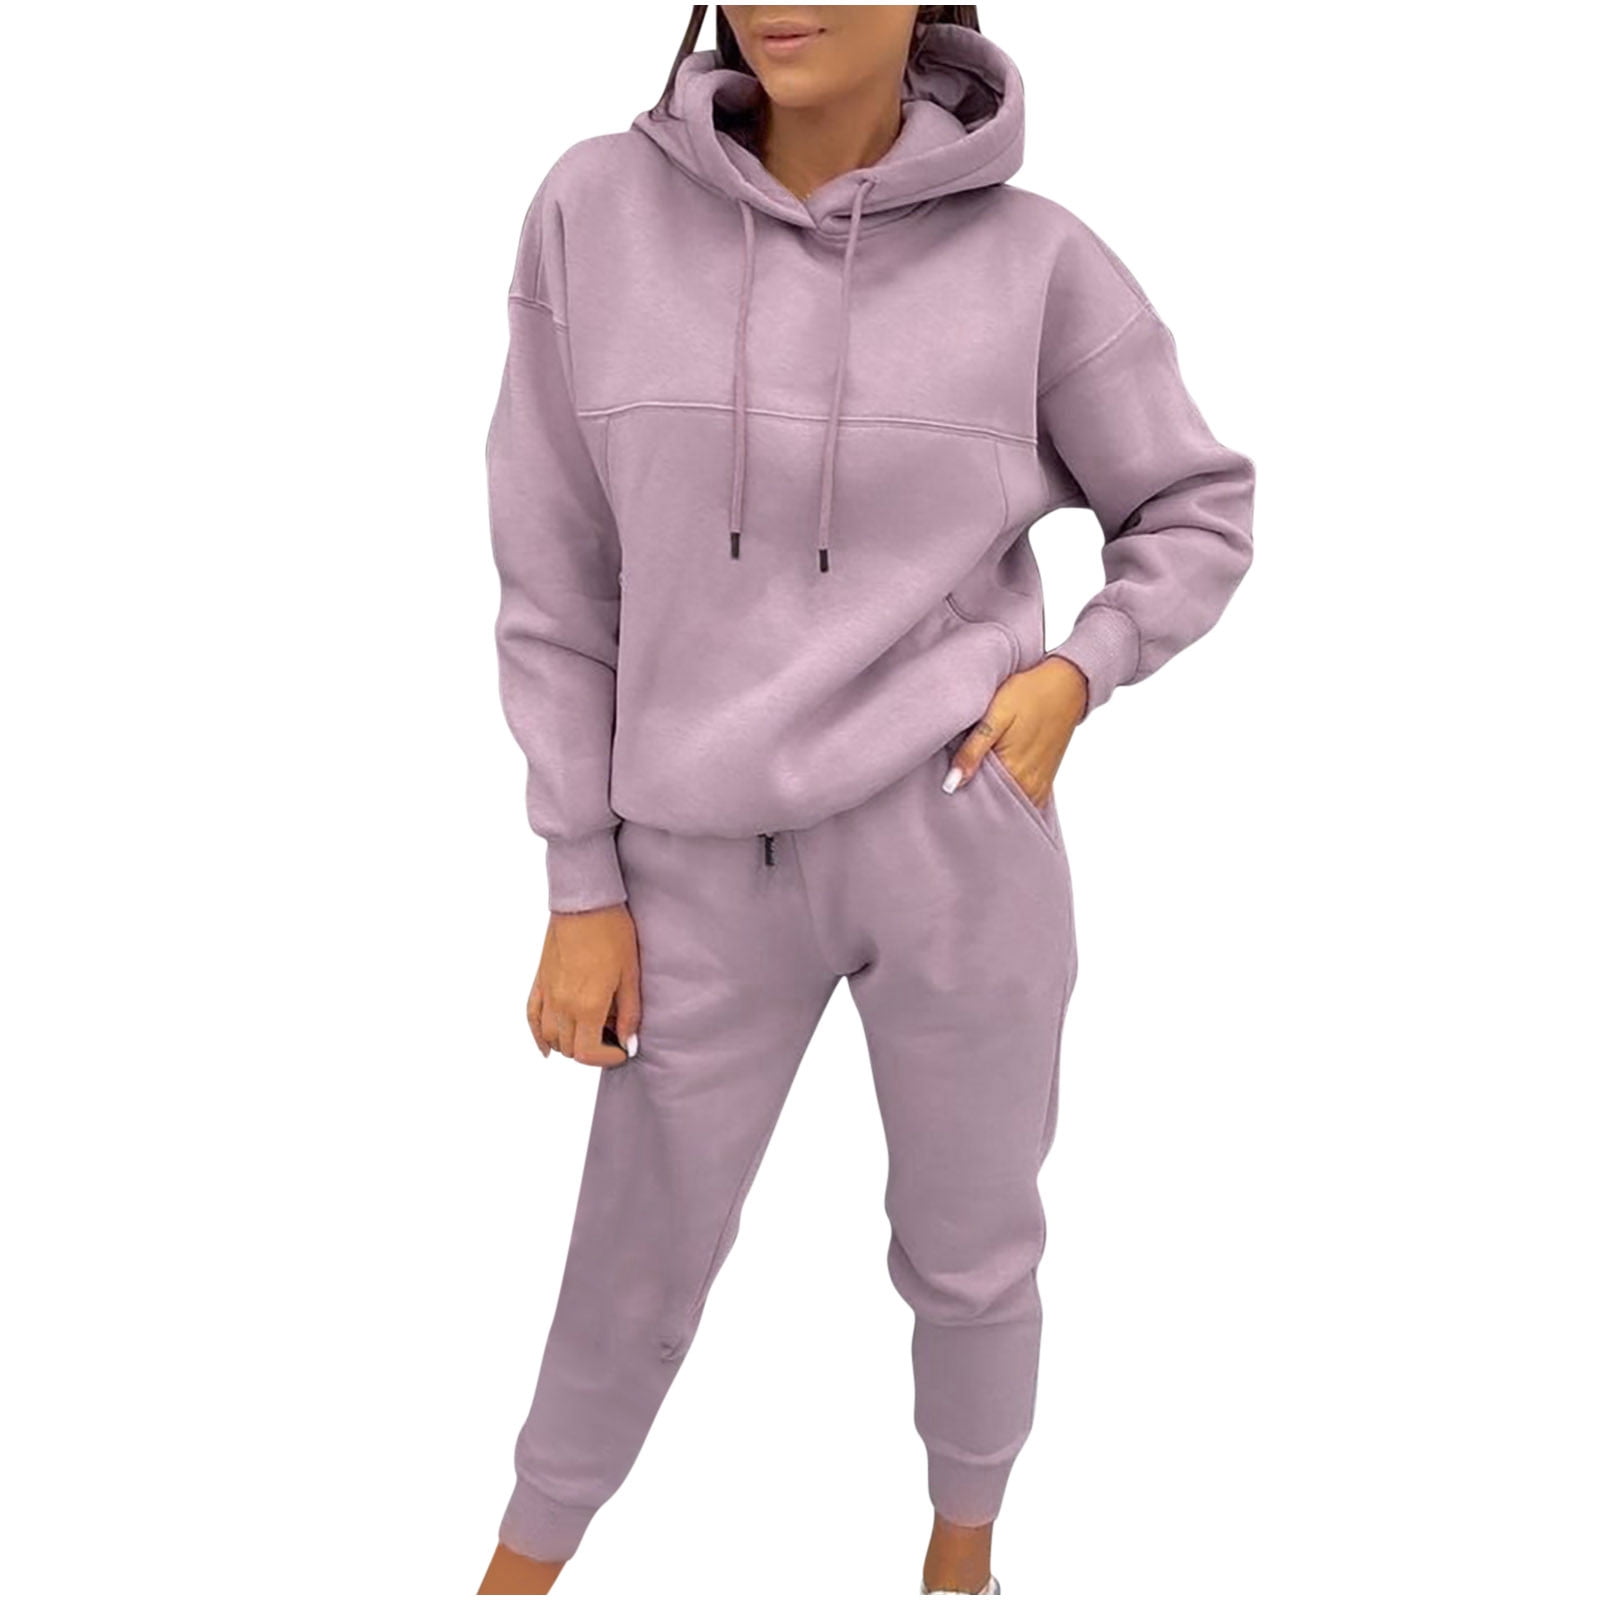 Women Hoodies Sweatsuit Long Sleeve Hooded Matching Joggers Sweatpants 2  Piece Tracksuit Sets Fall Winter Warm Jumpsuits Outfits Set